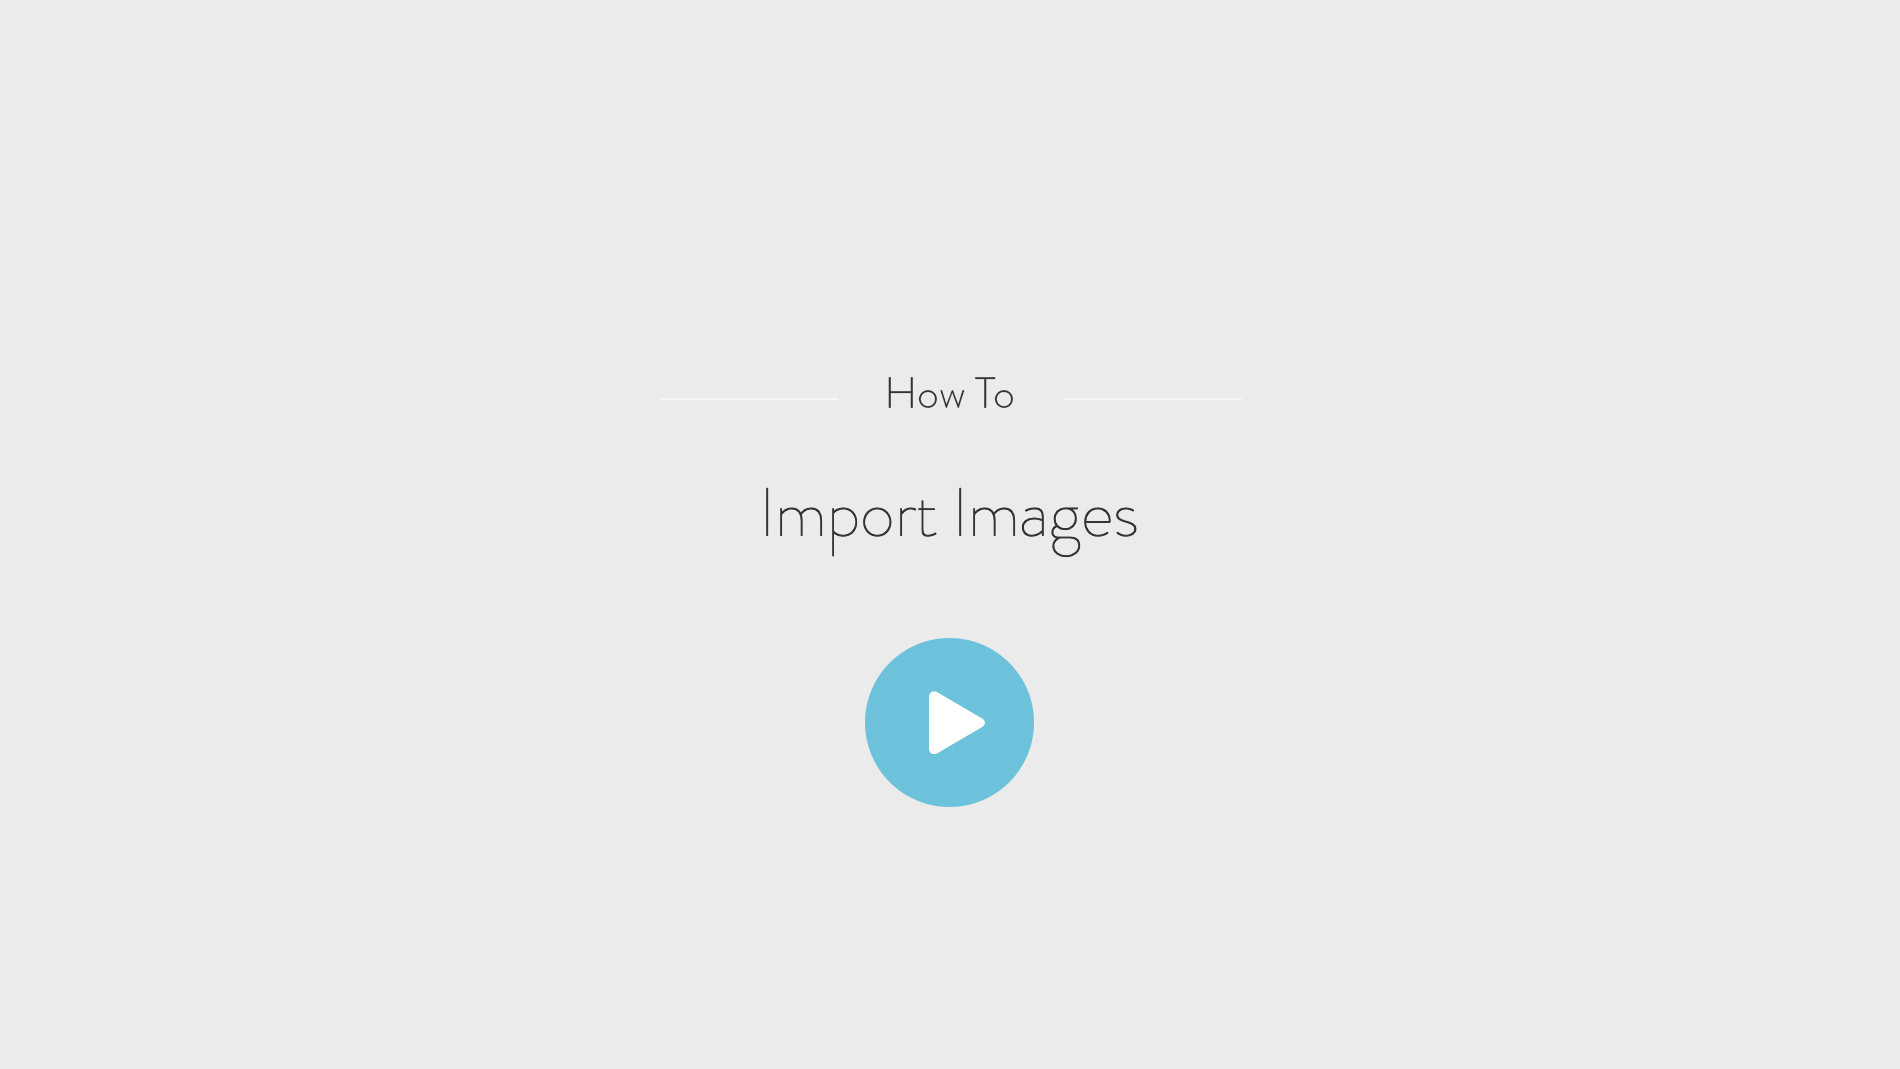 How to - Import images